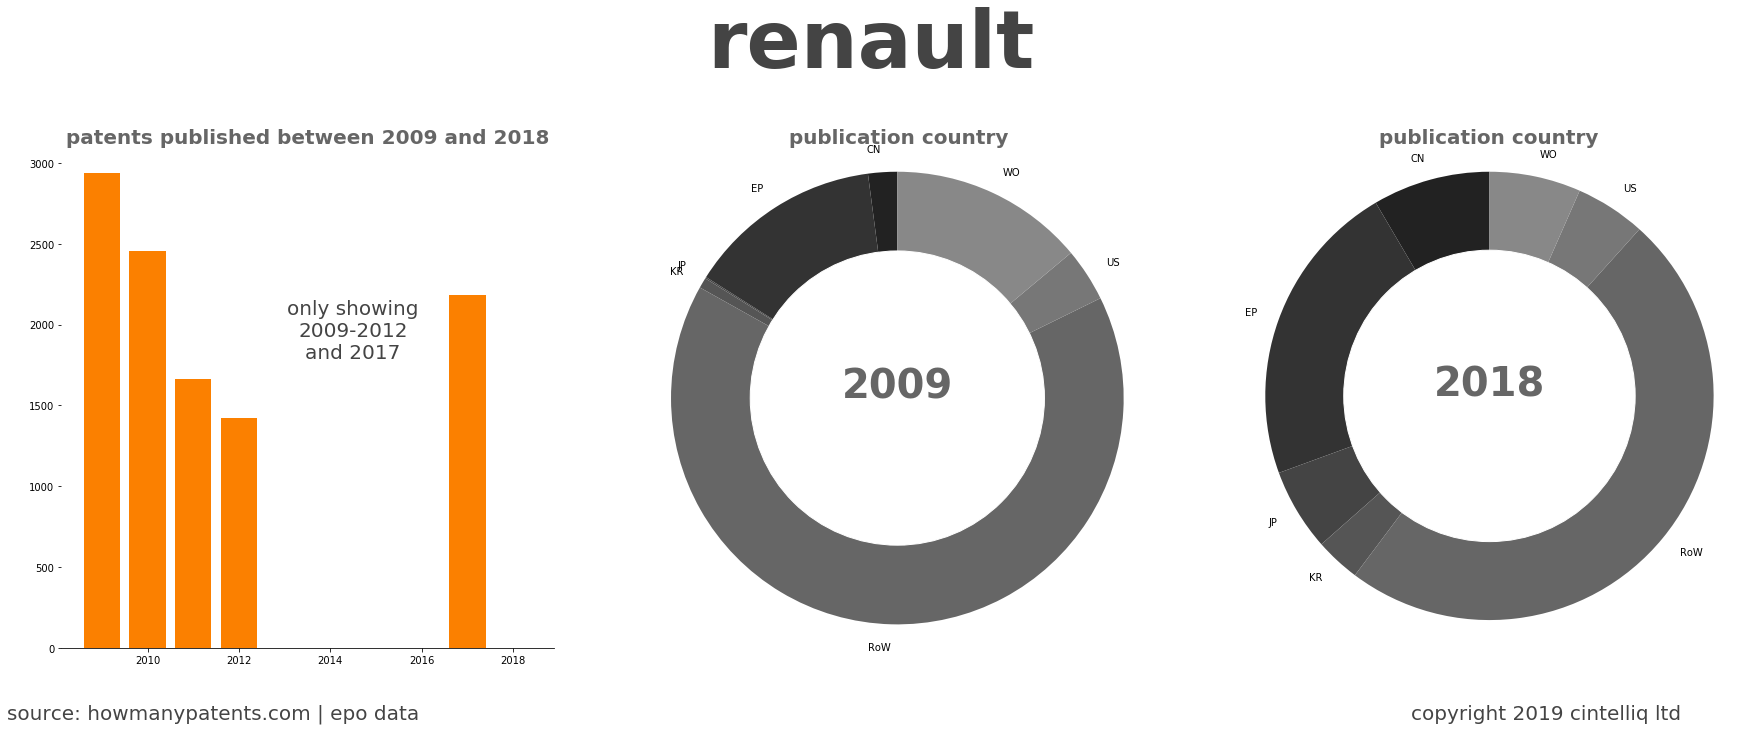 summary of patents for Renault